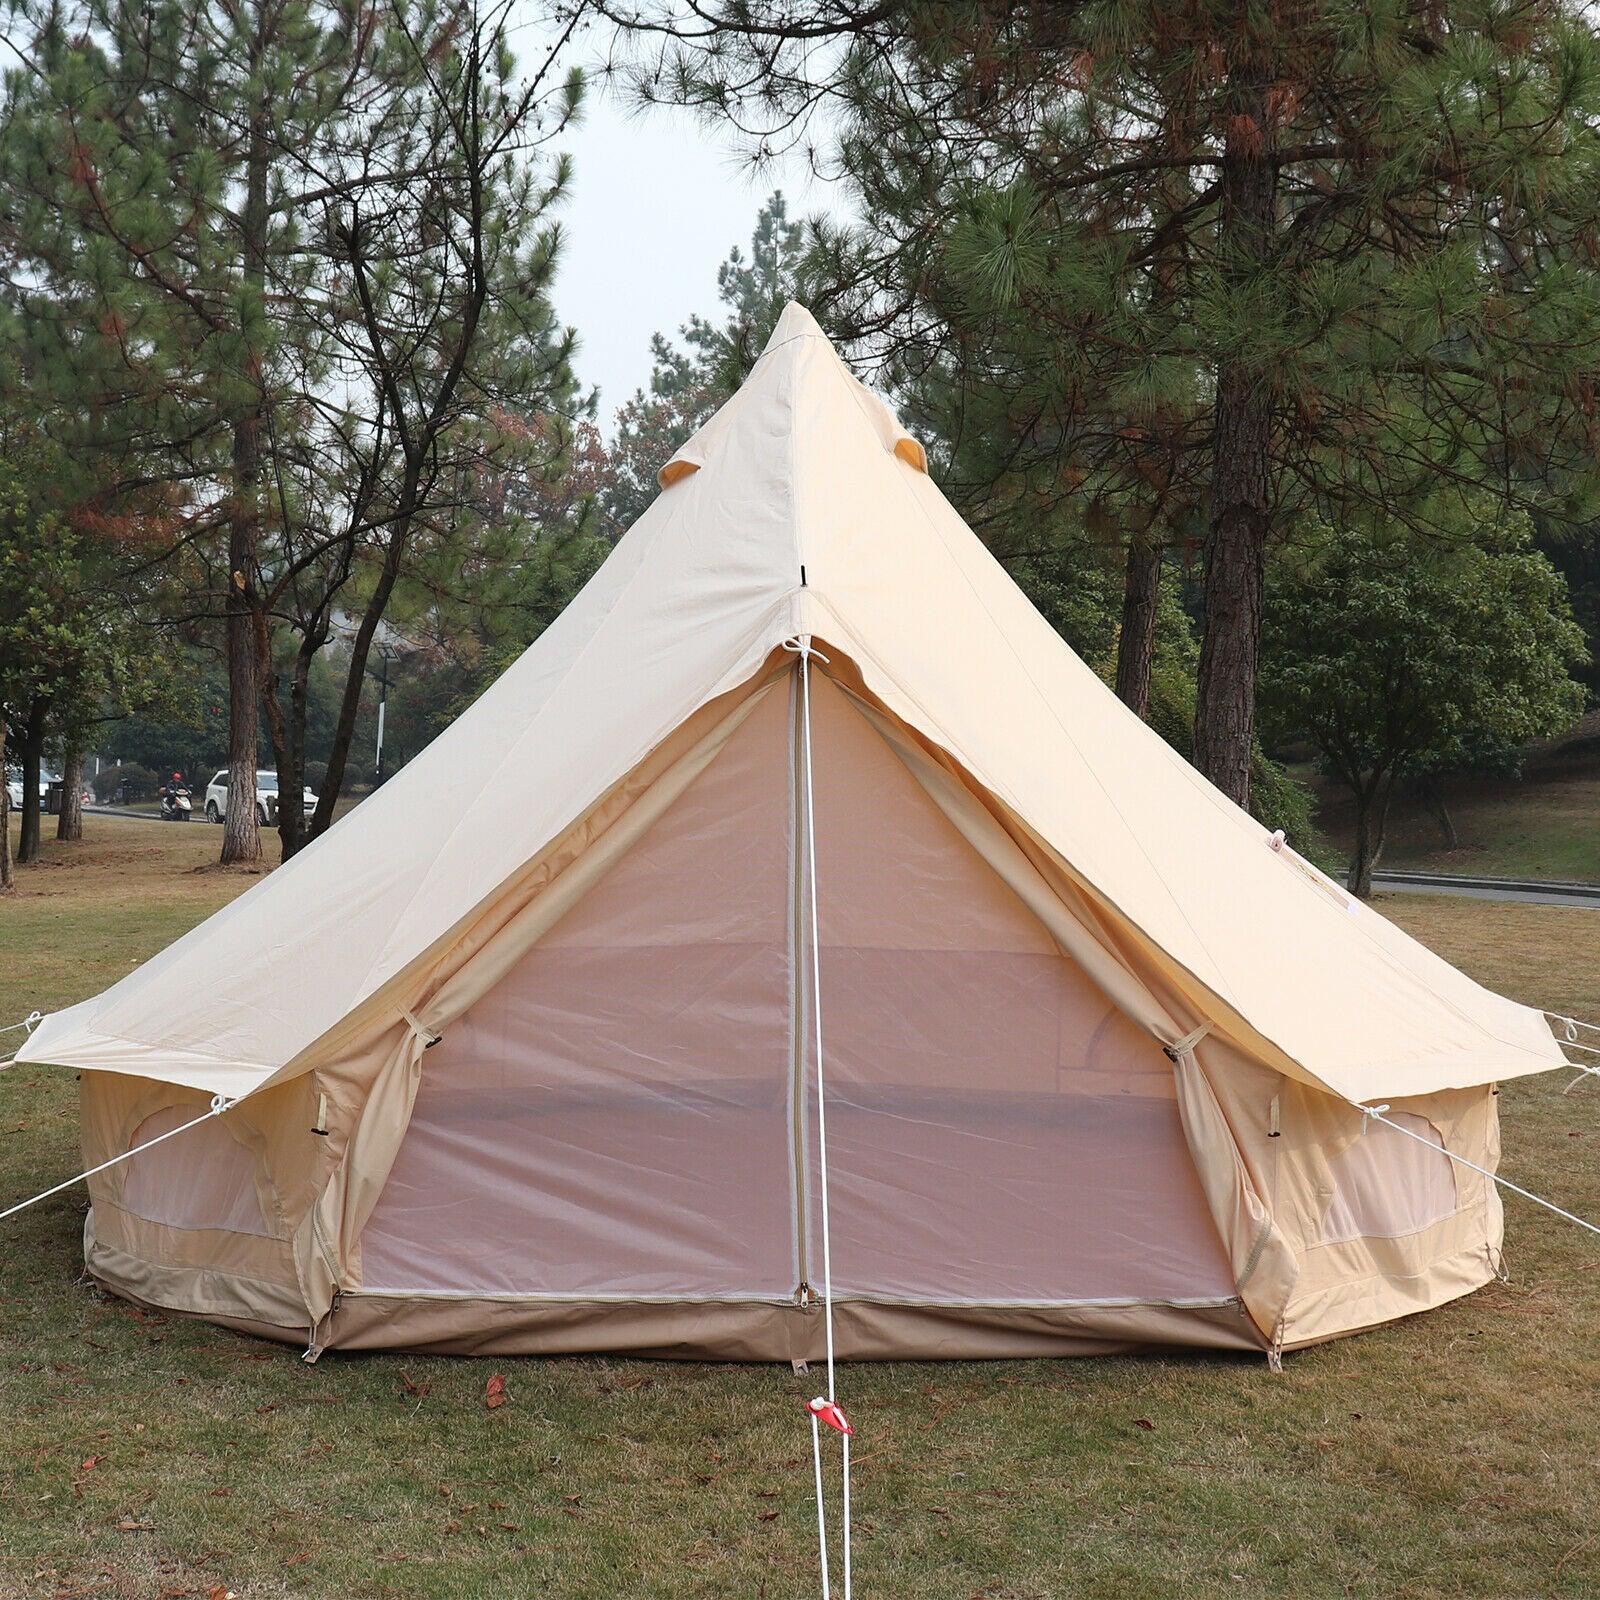 Large Inflatable Tent, Camping Tents, 3-5 Person Big Tent for Outdoor, Not  Required Tent Pole Set Up in Seconds, Easy Set Up, Canvas Bell Tent for